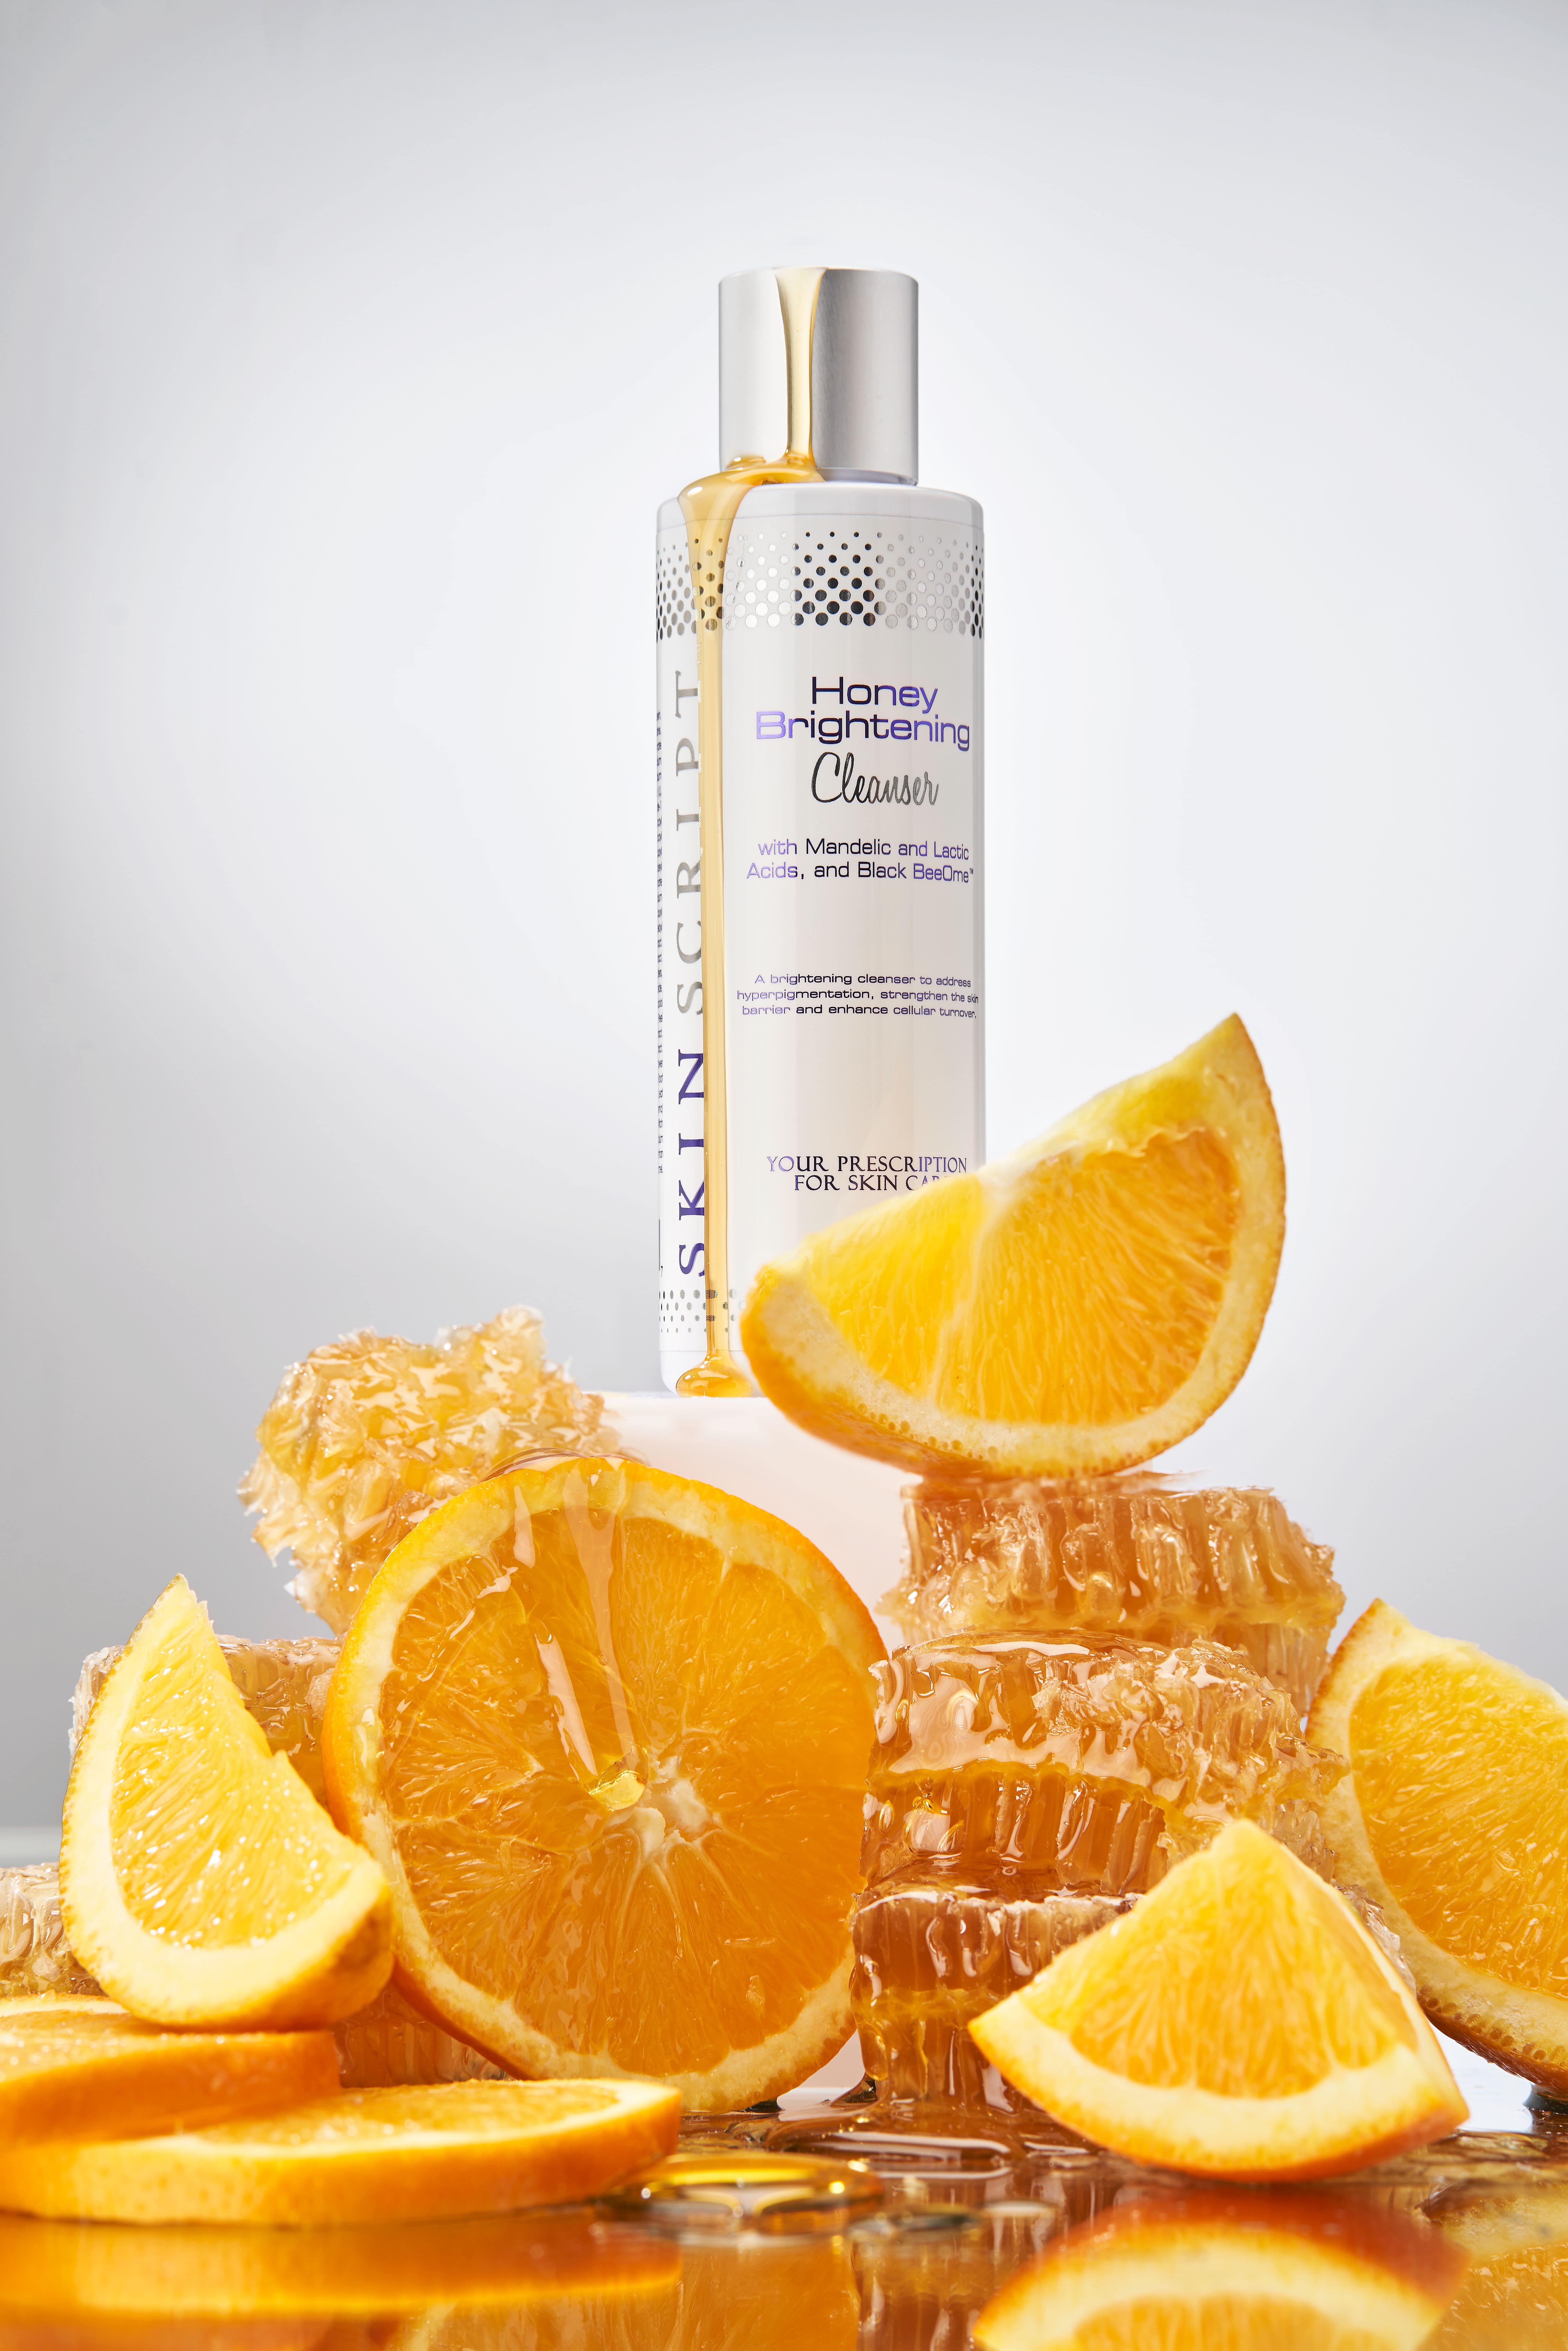 Honey Cleanser dripping image for landing page